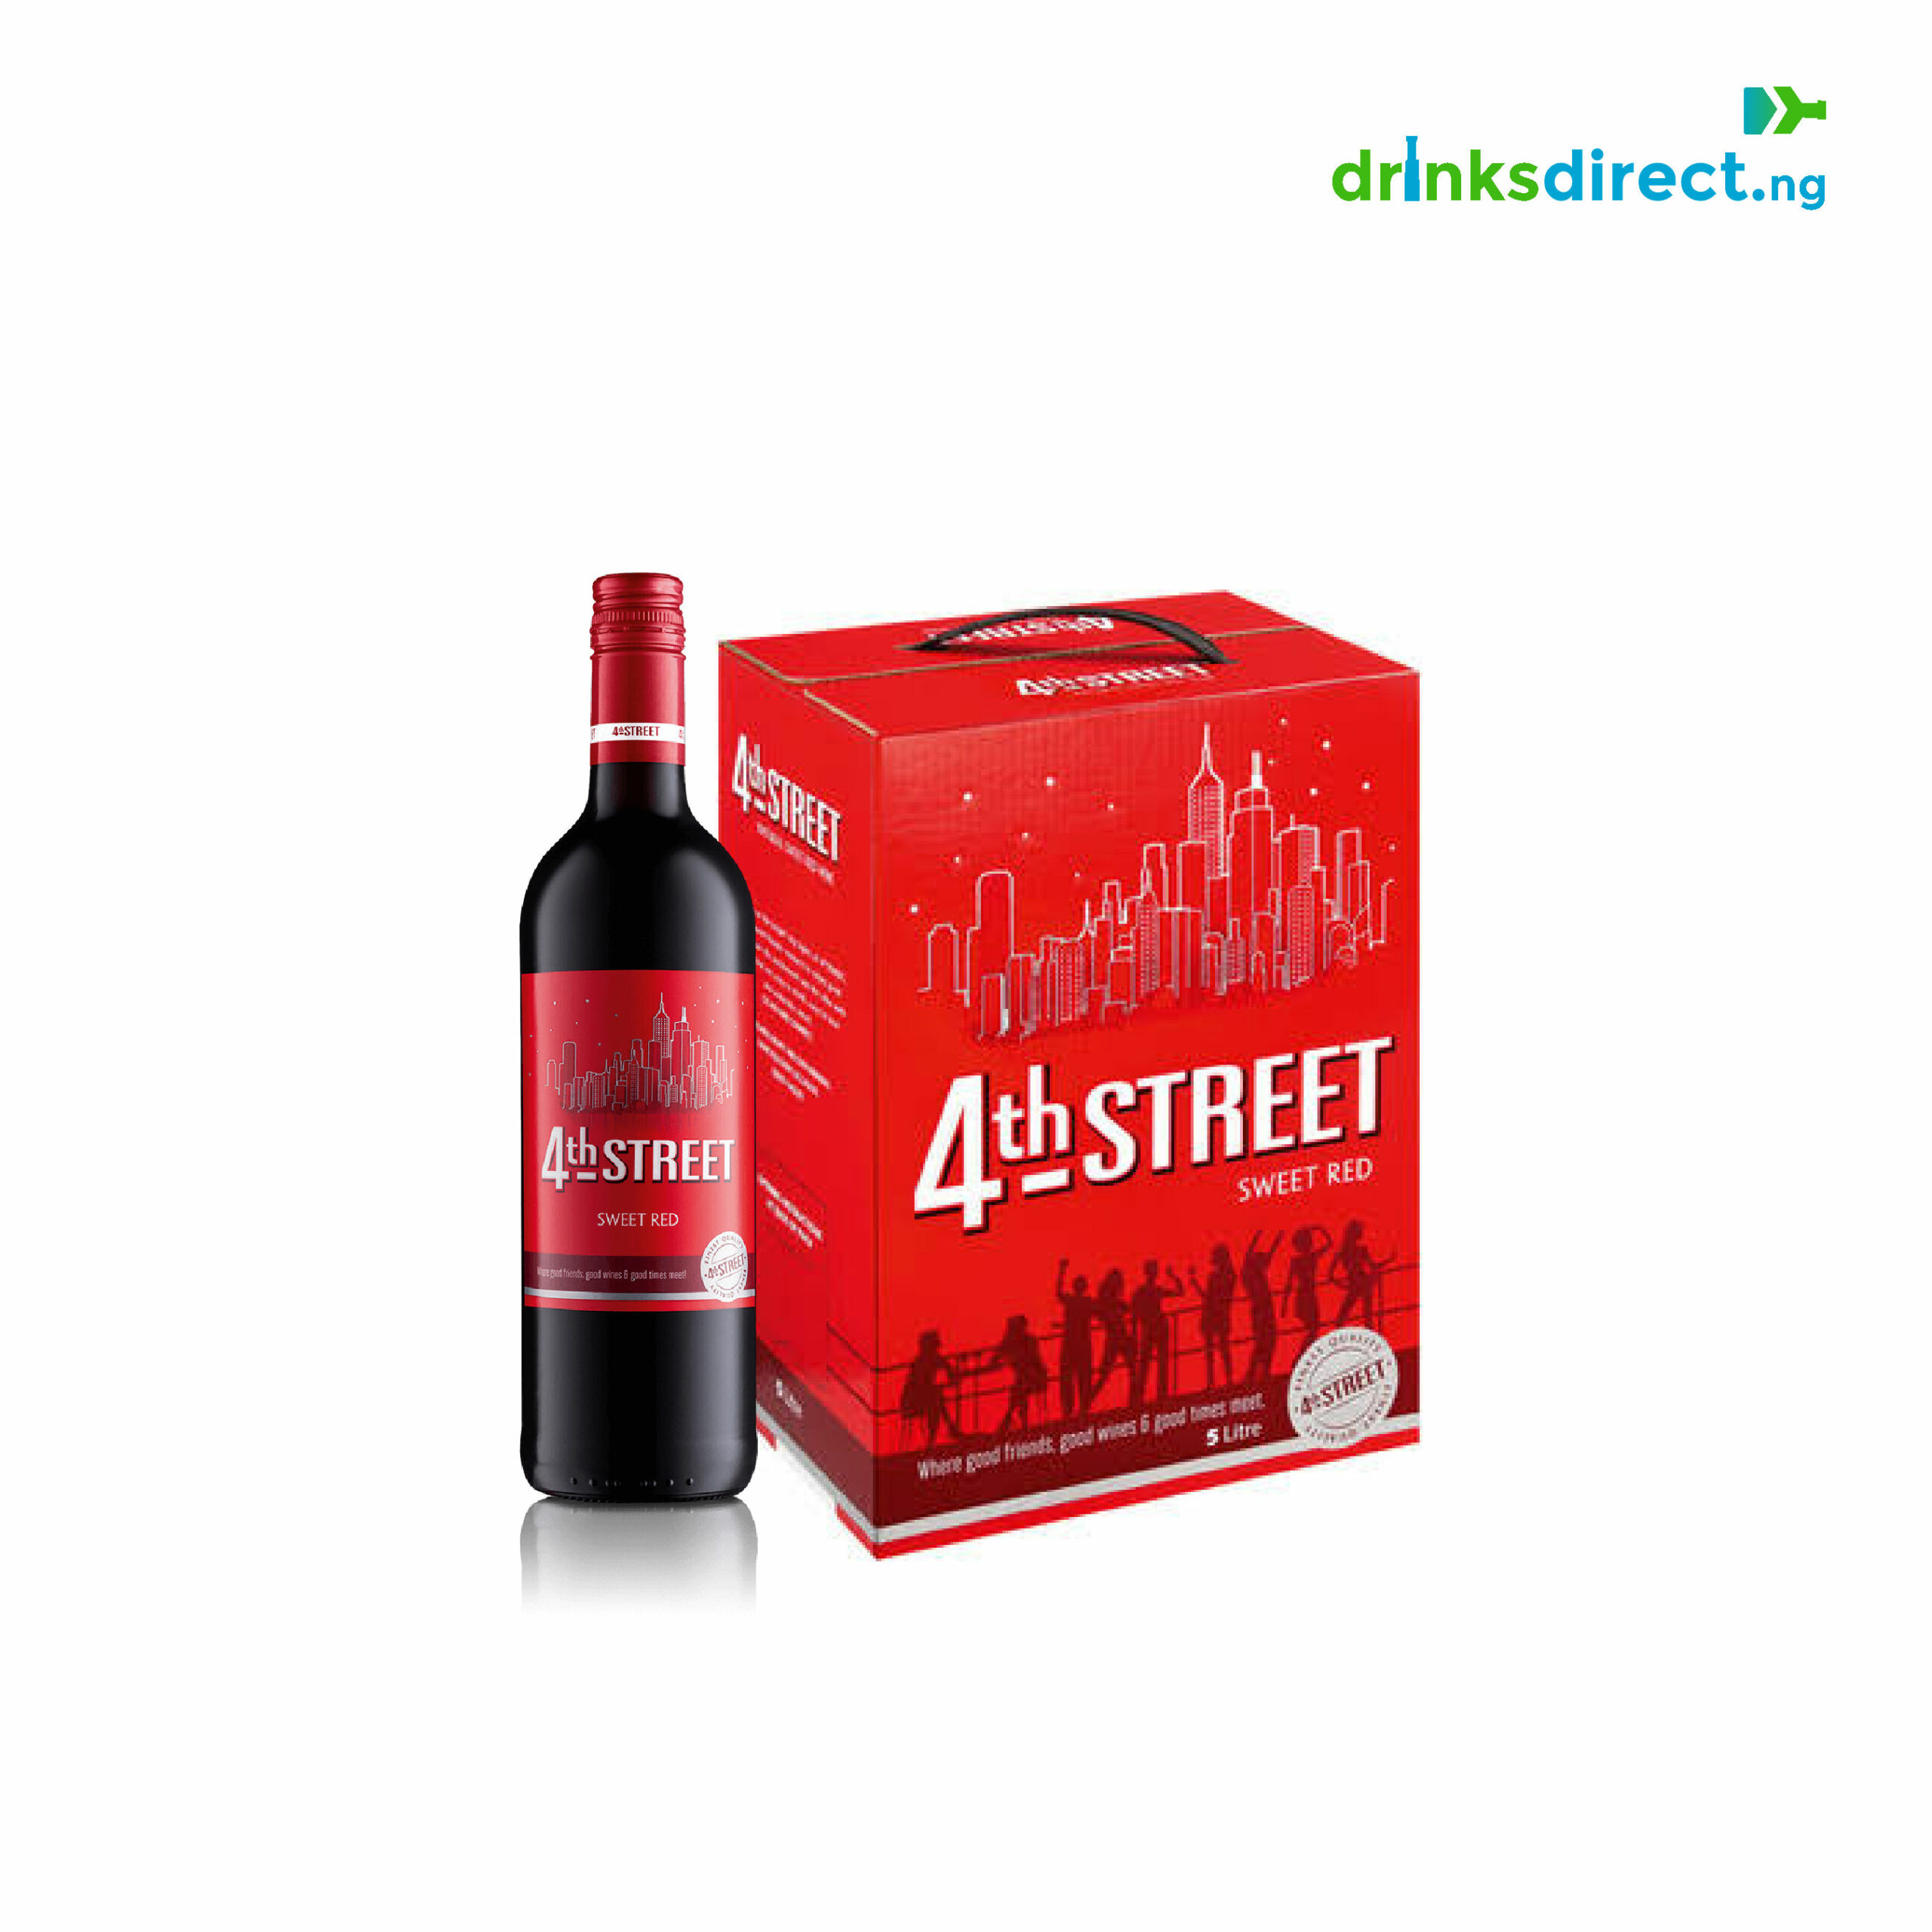 4th street red wine 75cl(south africa) x6